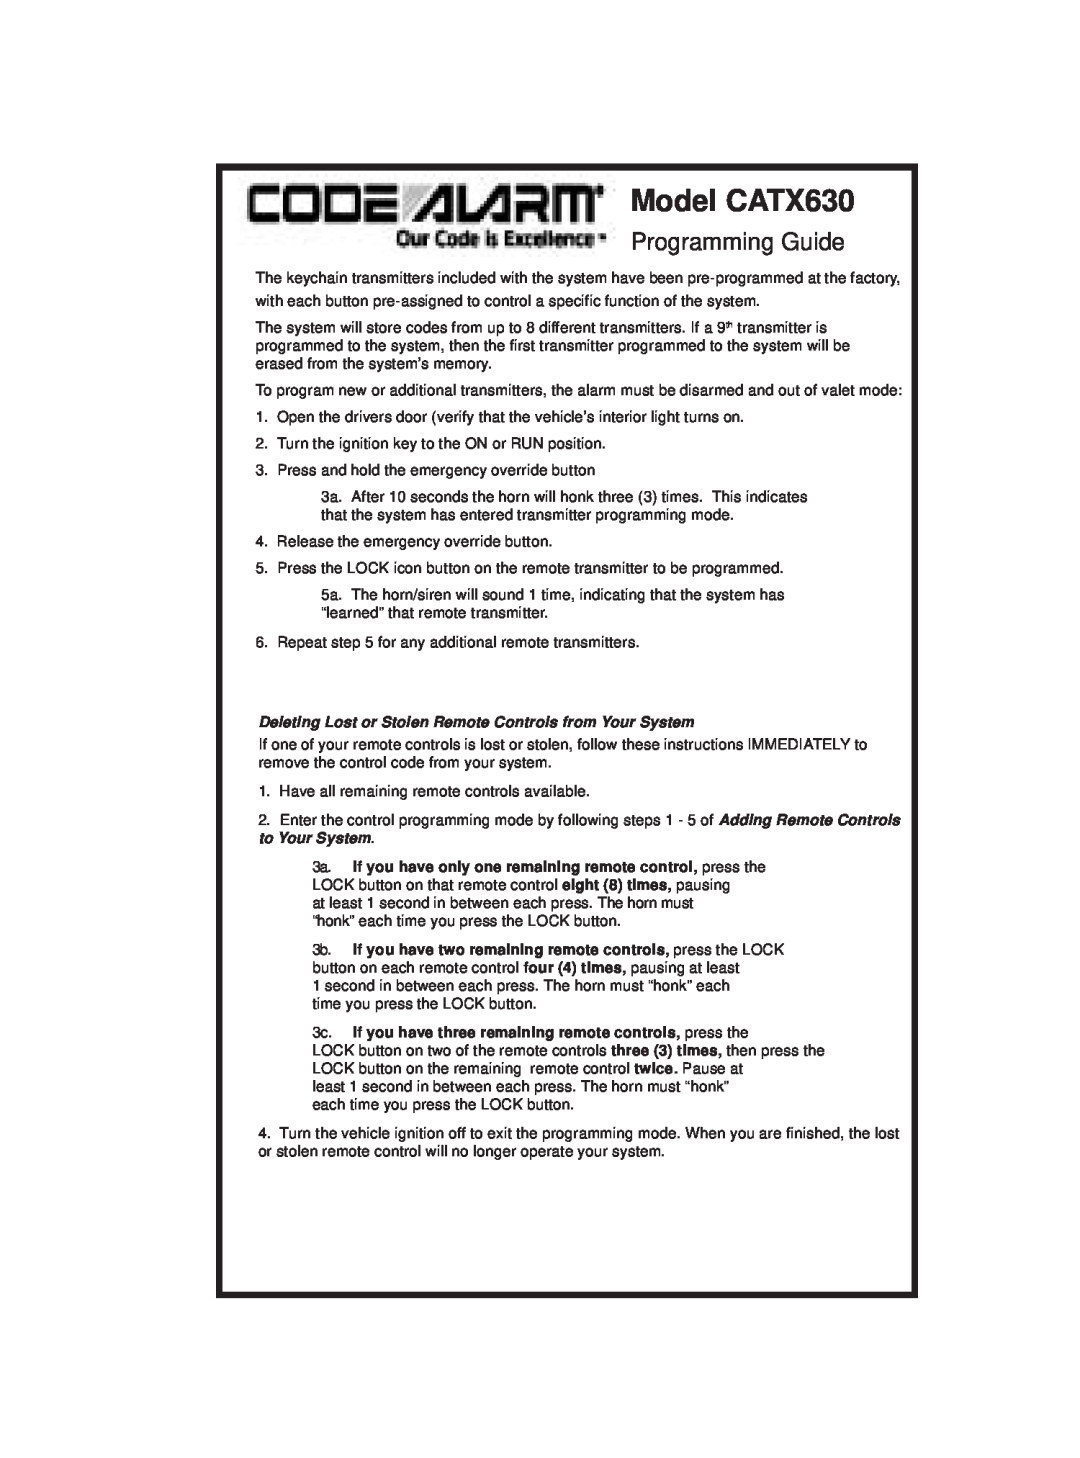 Code Alarm manual Model CATX630, Programming Guide, Deleting Lost or Stolen Remote Controls from Your System 